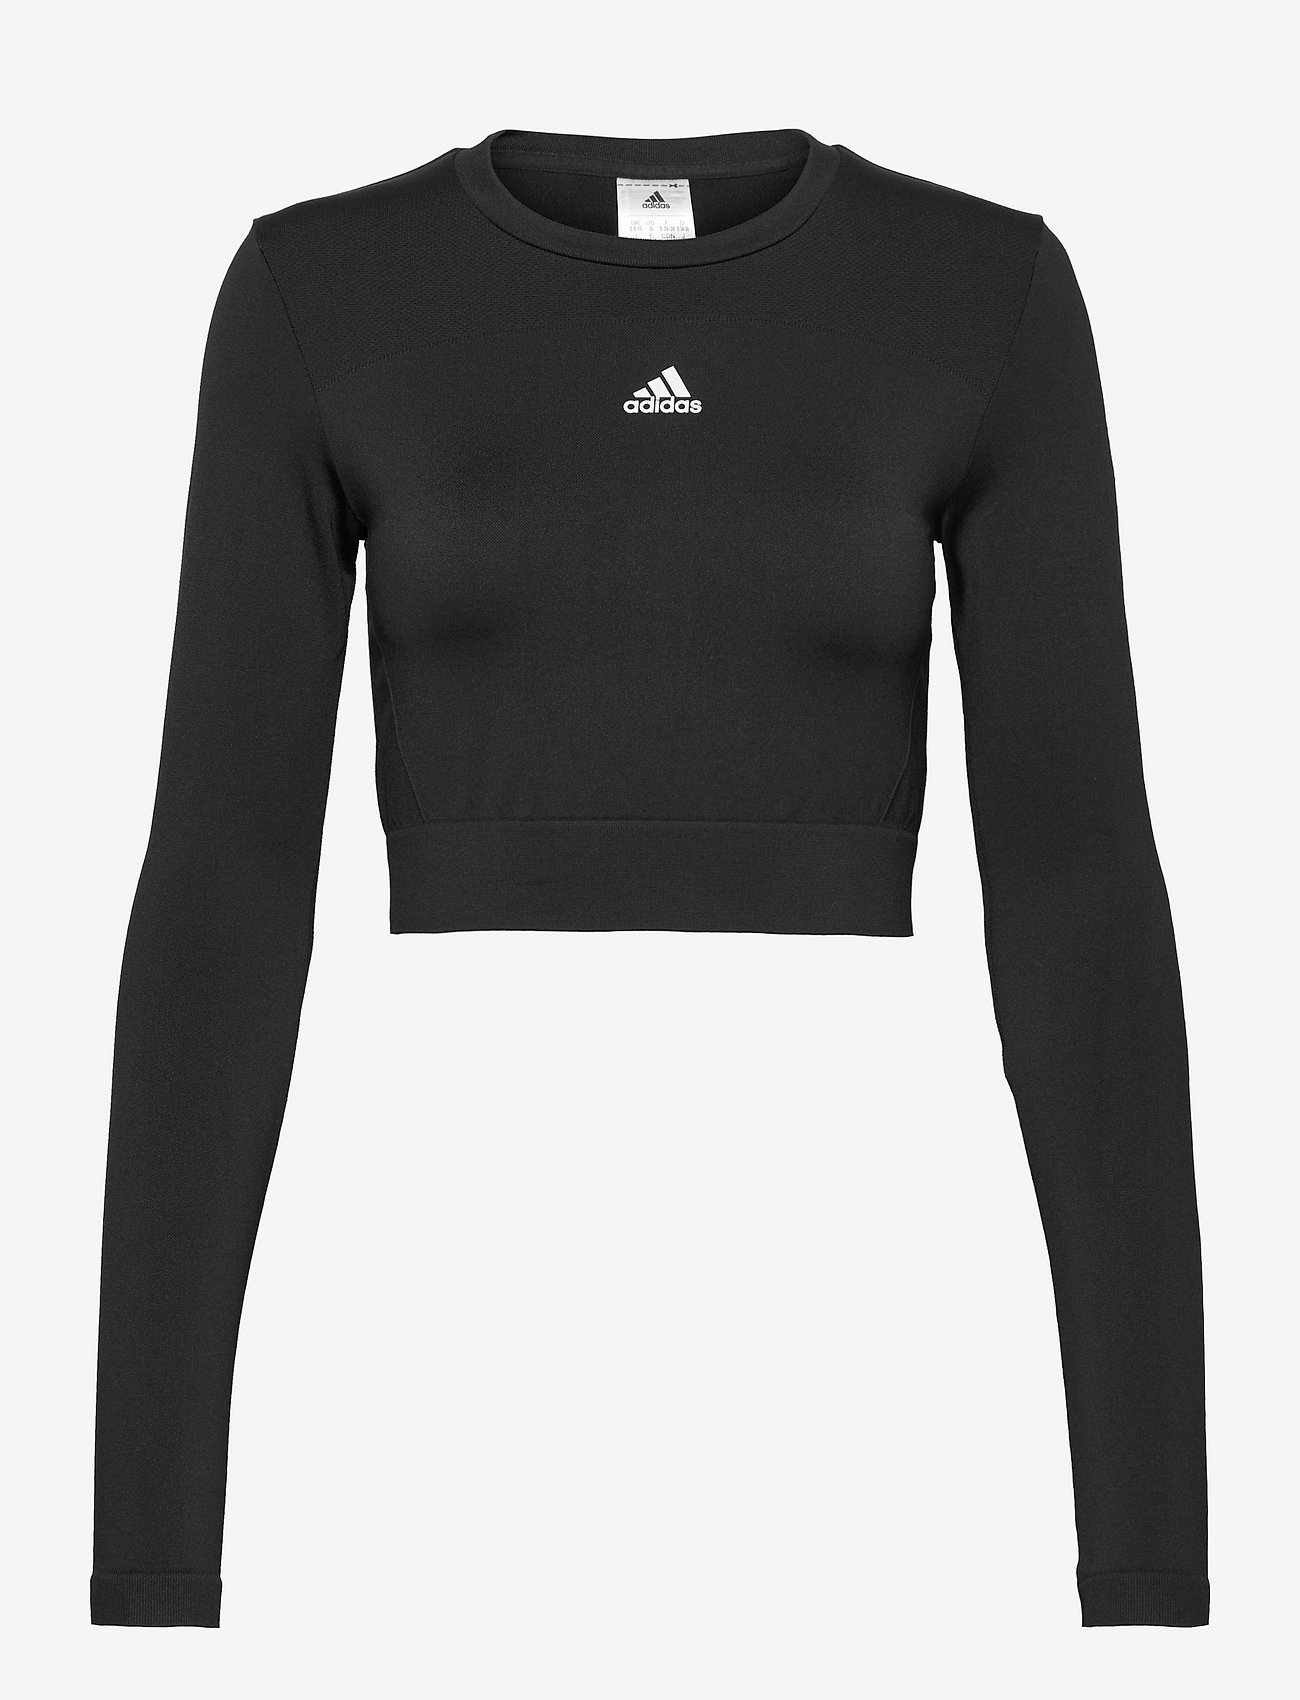 adidas Performance - adidas AEROKNIT Seamless Fitted Cropped Long-Sleeve Top - laveste priser - black/white - 0